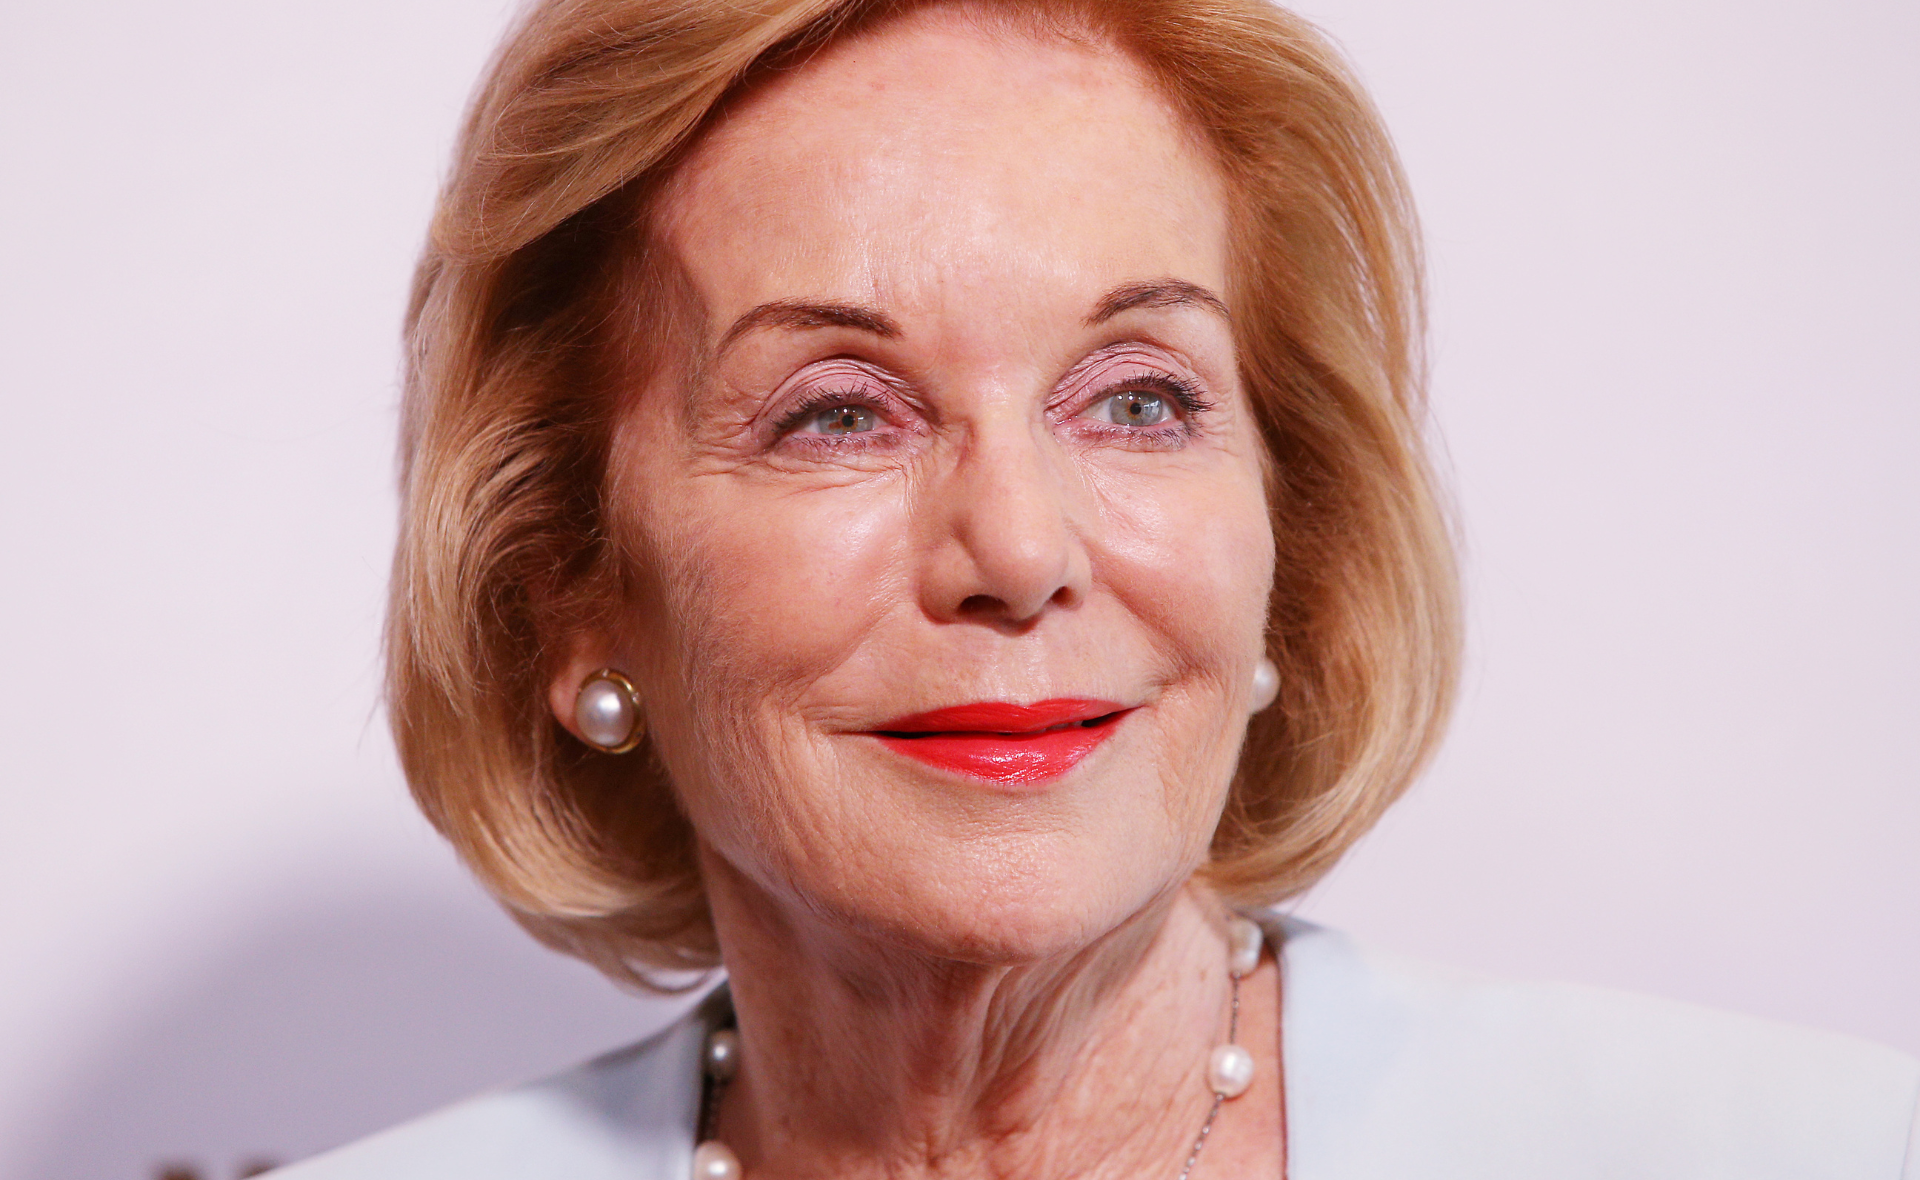 “You can’t assume it won’t happen to you”: Ita Buttrose launches osteoporosis awareness campaign